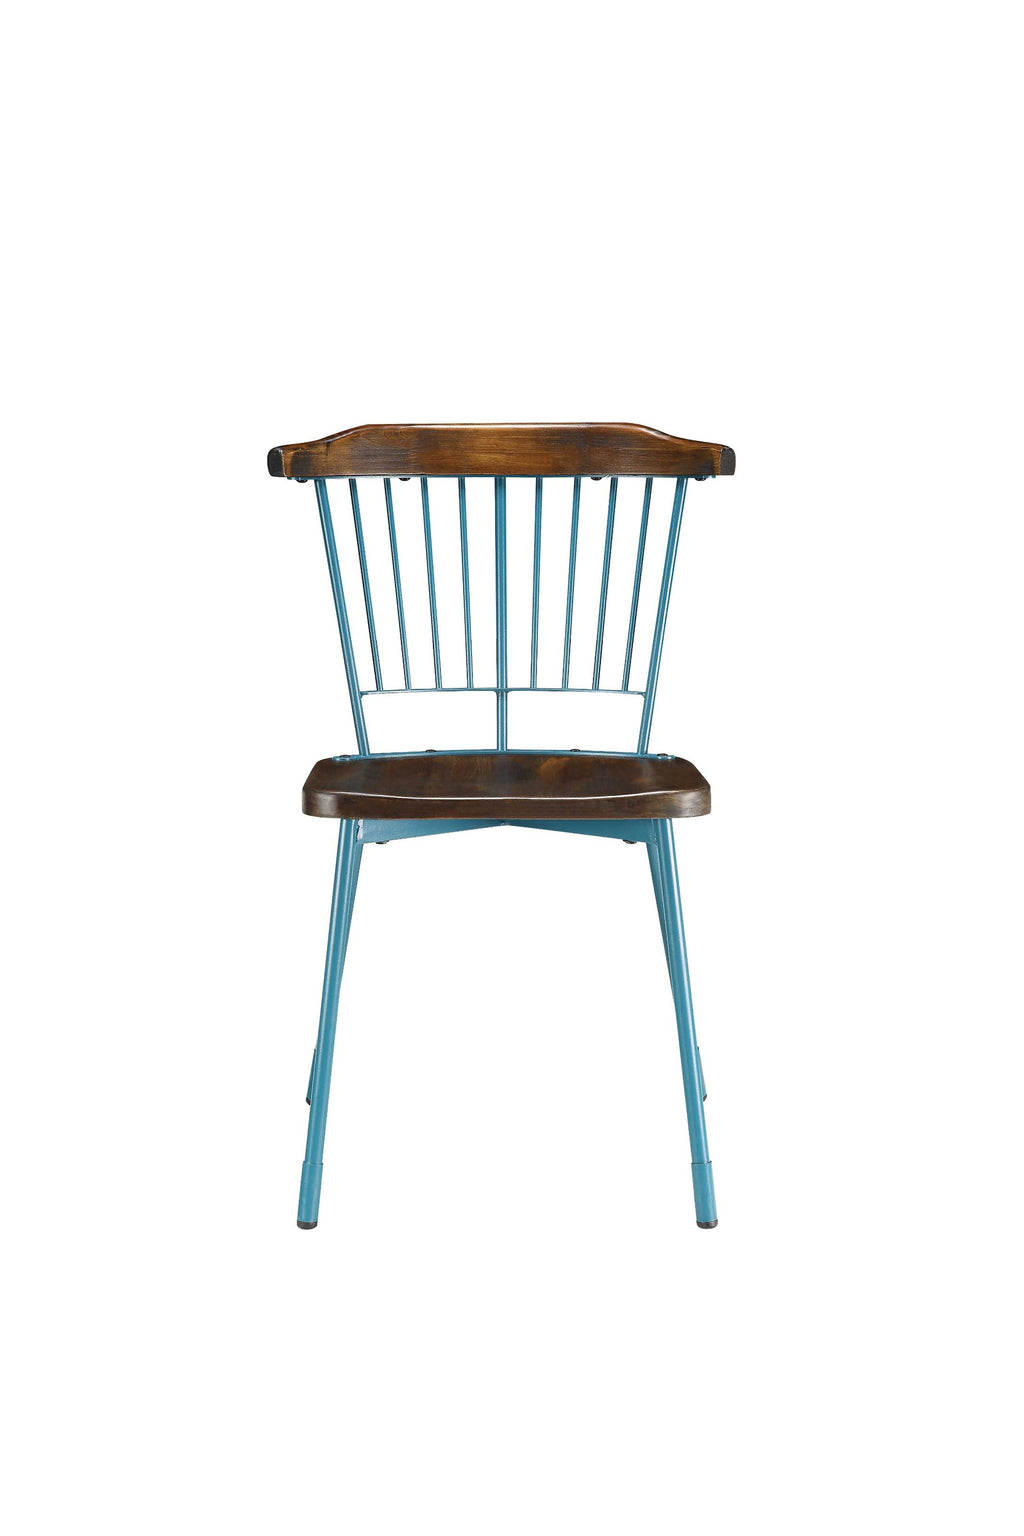 Wood and Metal Side Chairs with Slat Style Back, Blue and Brown, Set of Two